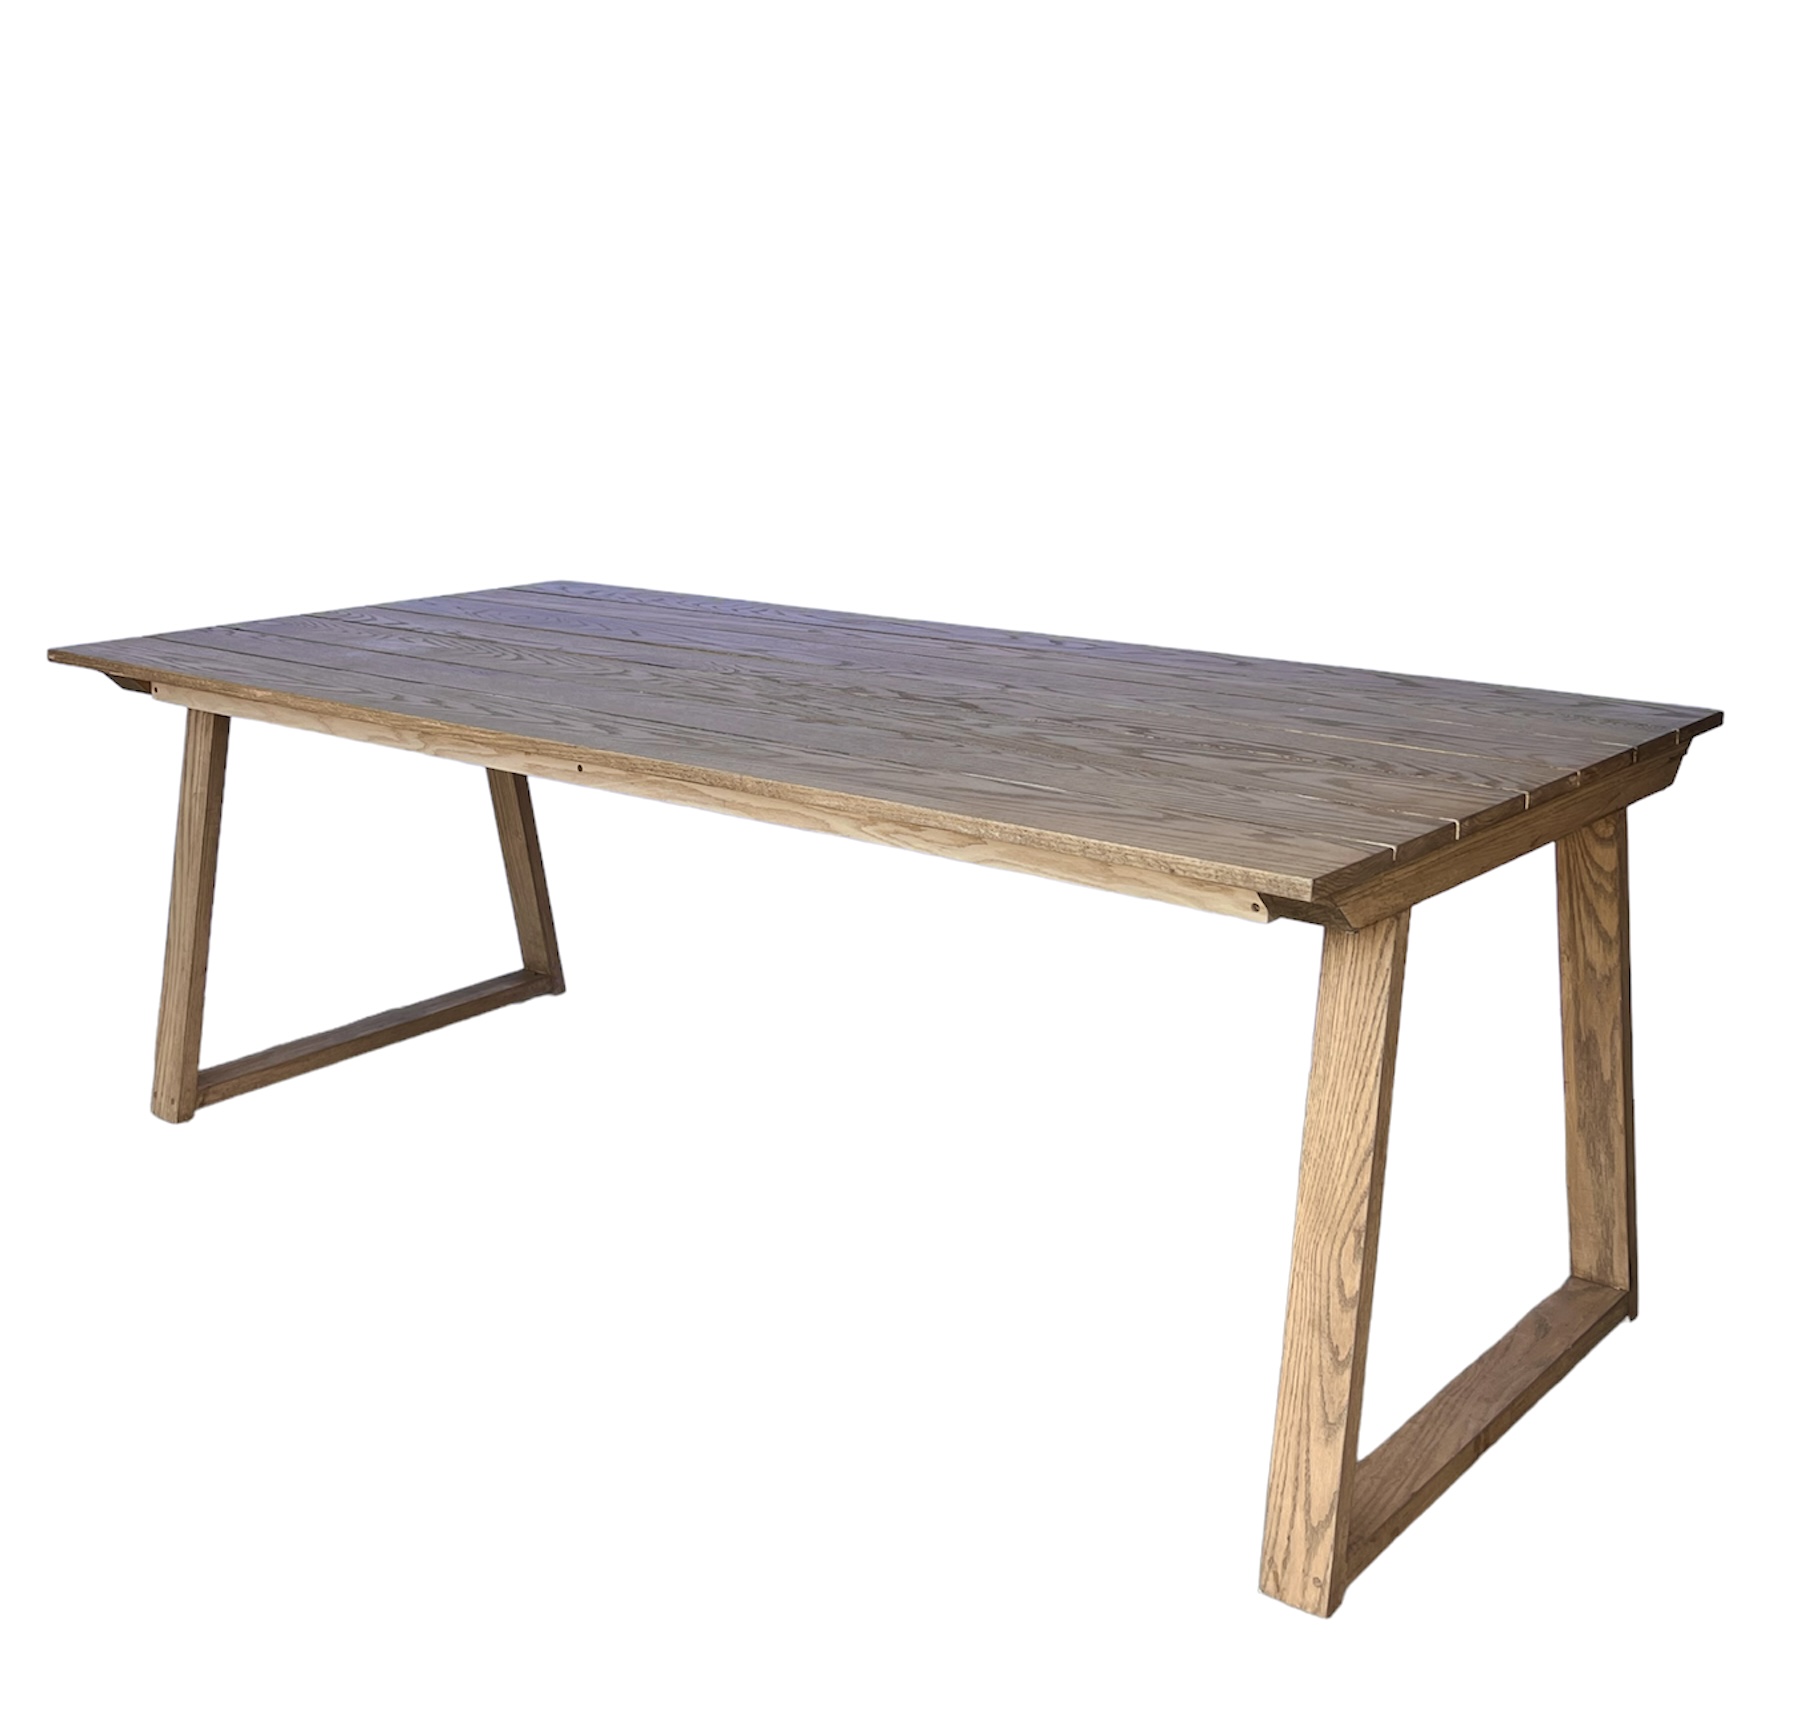 RUSTIC TABLE